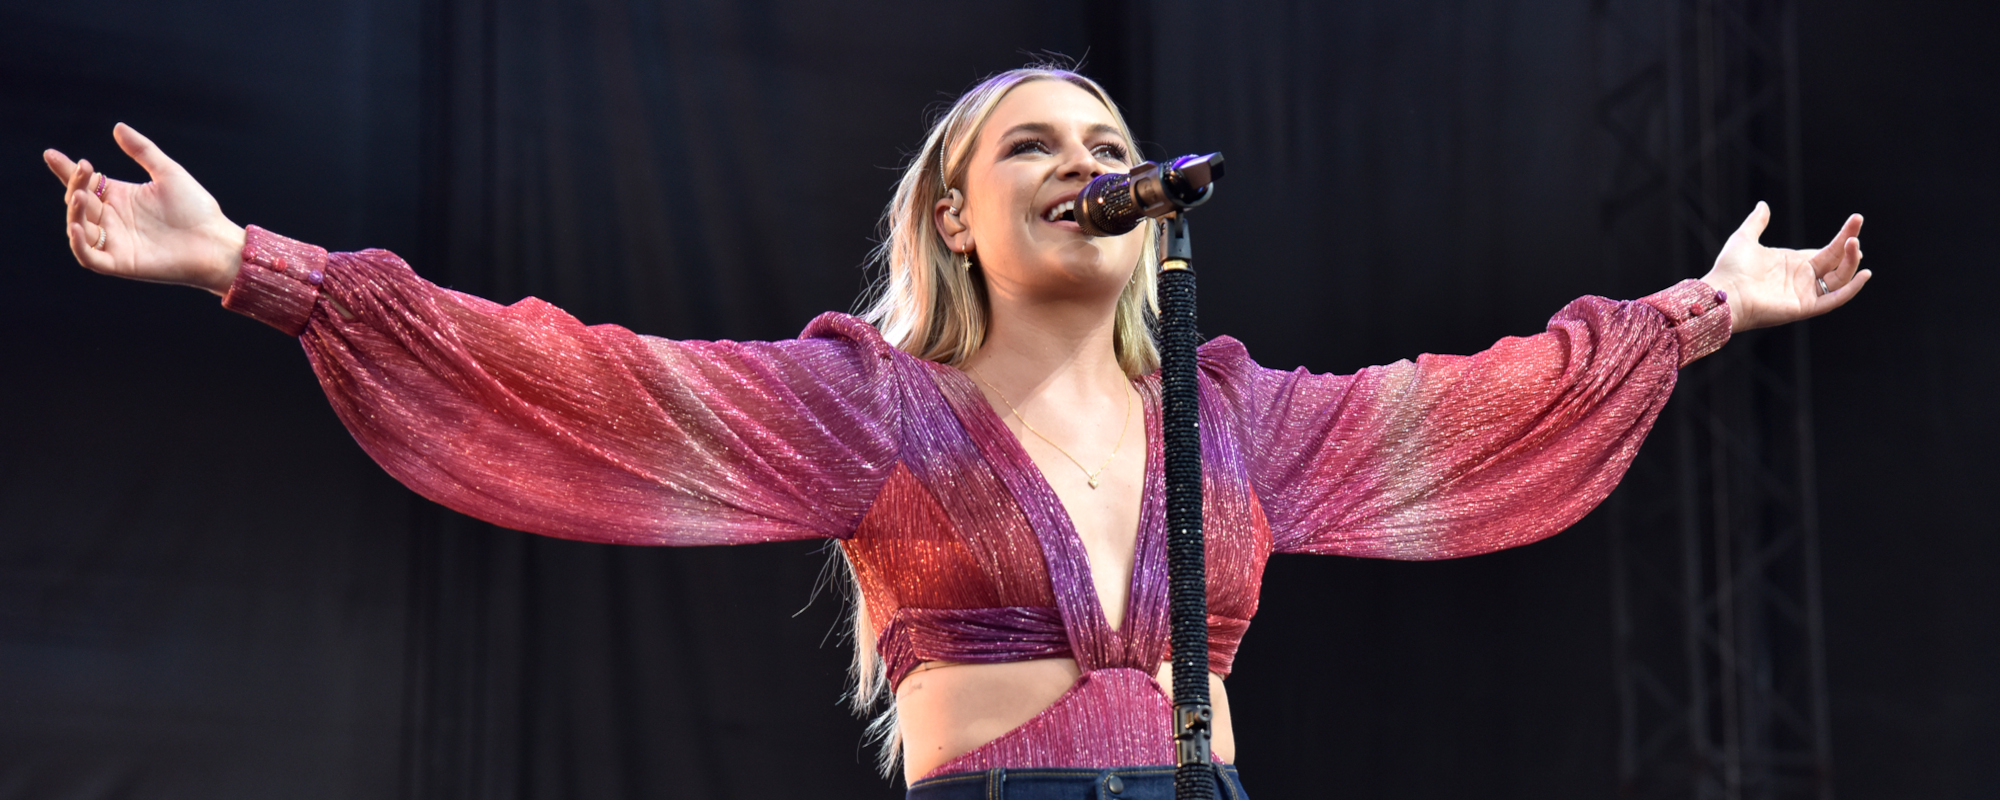 Kelsea Ballerini and Actor Anthony Mackie to Host 2022 CMT Music Awards